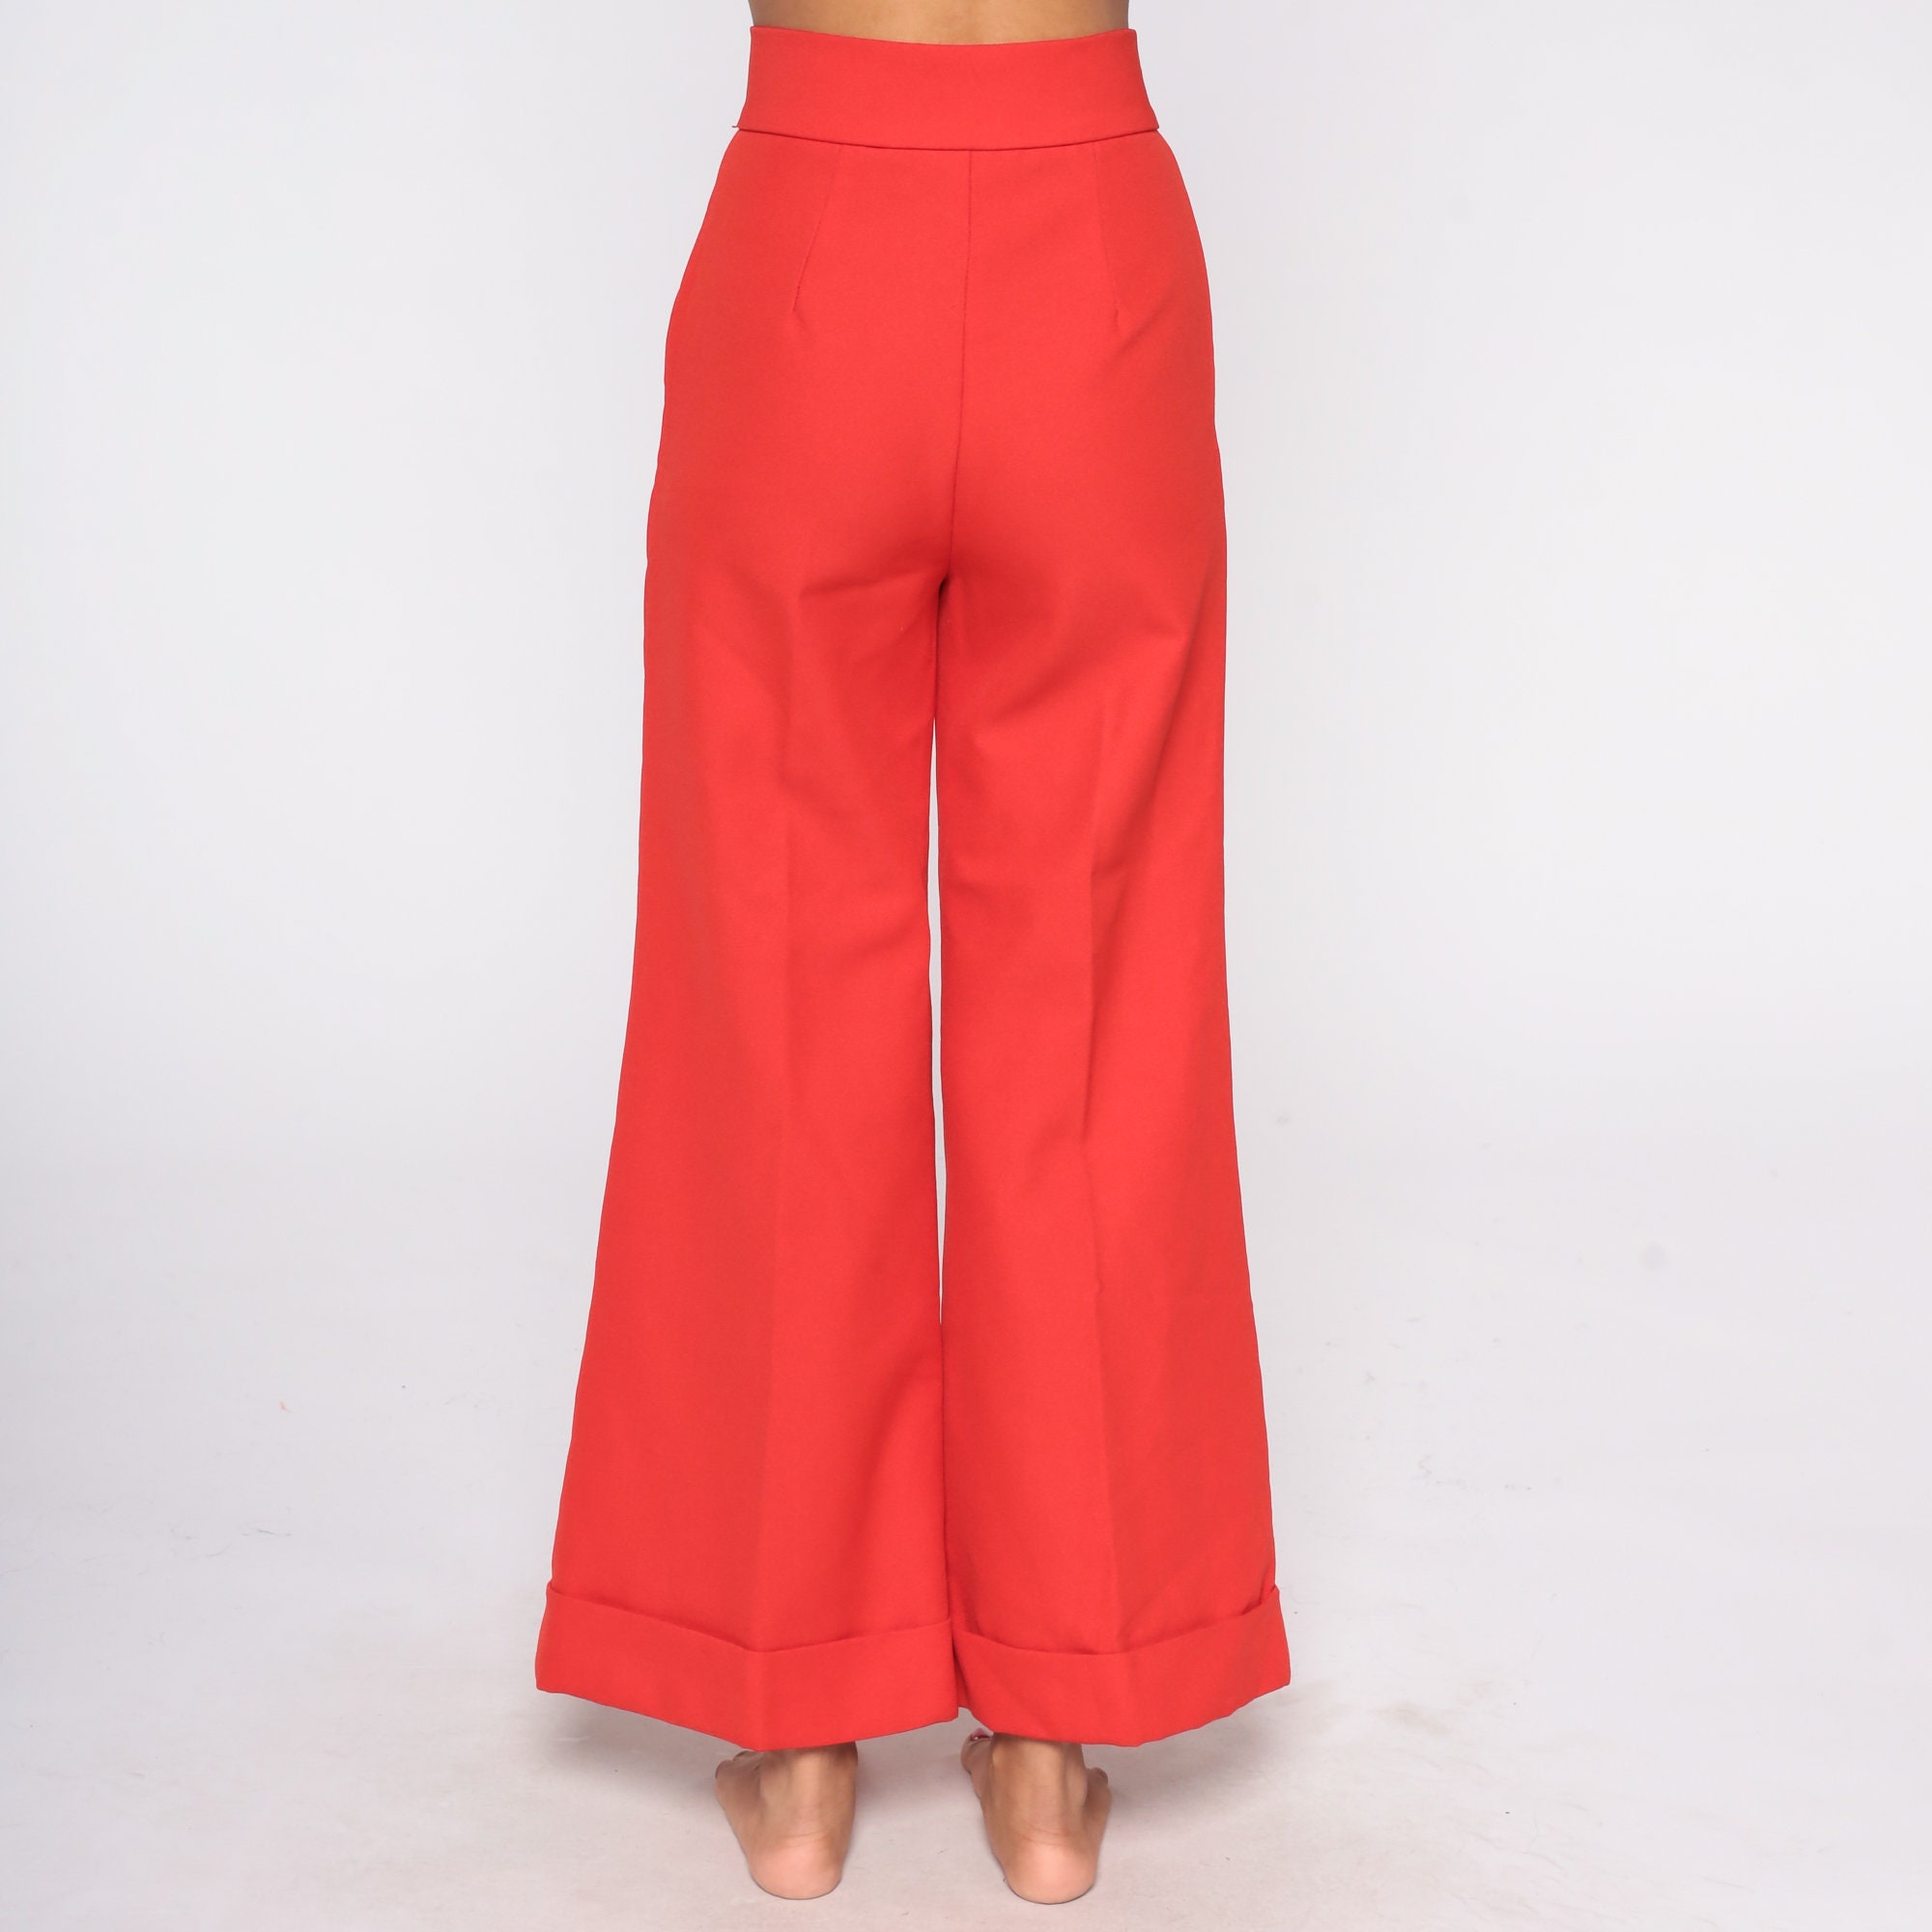 Red Bell Bottoms 70s Flare Pants Boho Hippie Bellbottom High Waisted ...